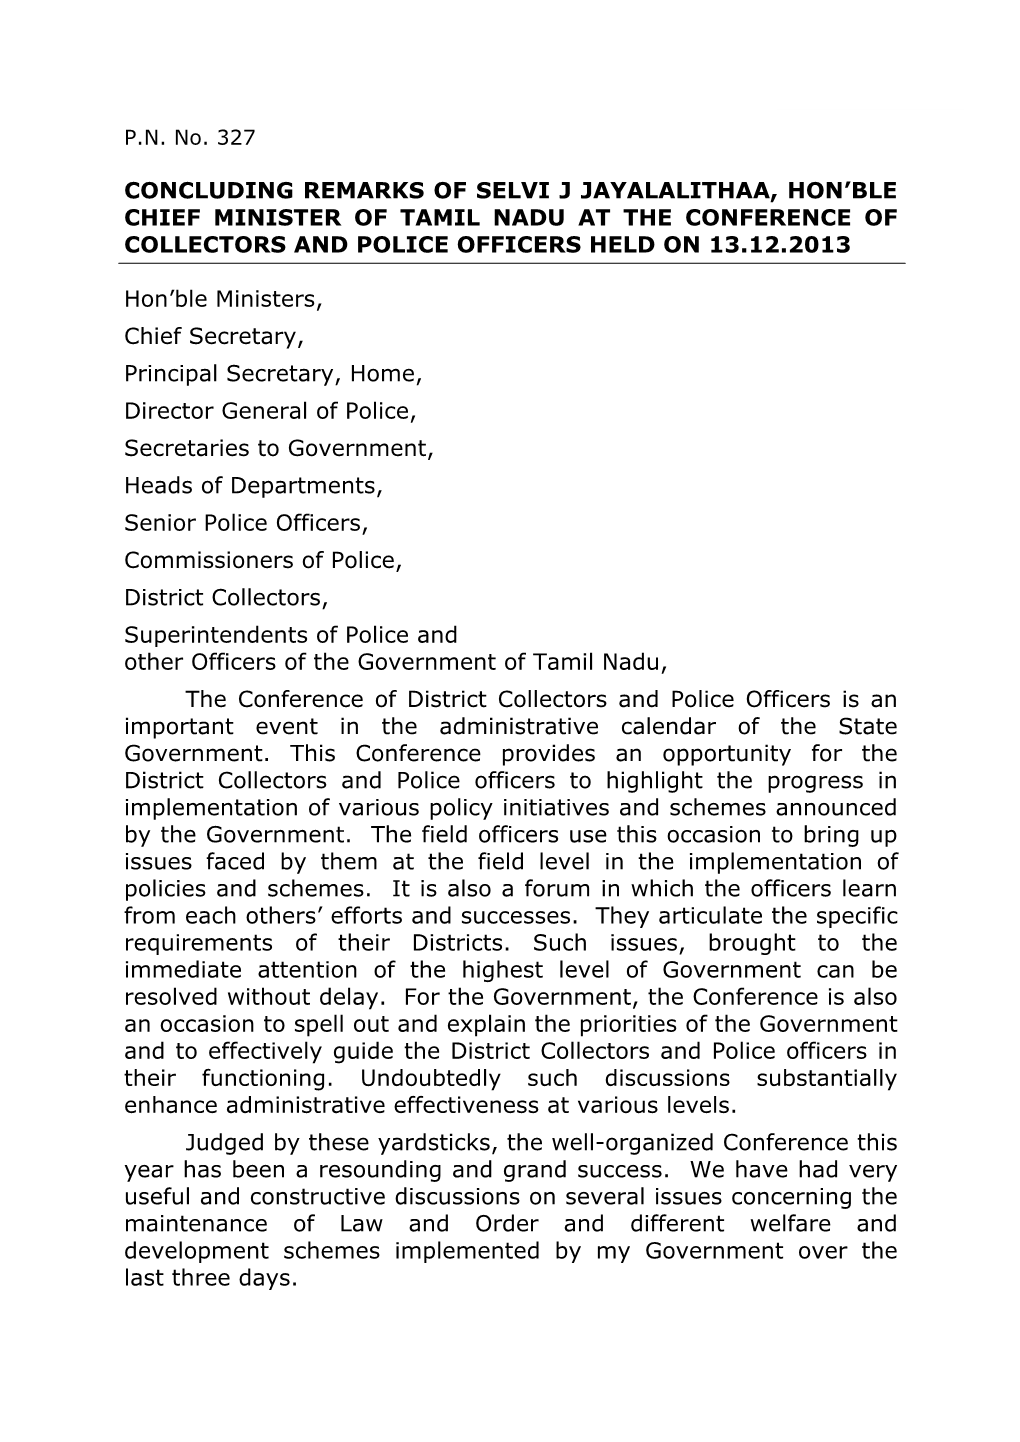 Concluding Remarks of Selvi J Jayalalithaa, Hon'ble Chief Minister of Tamil Nadu at the Conference of Collectors and Police Of